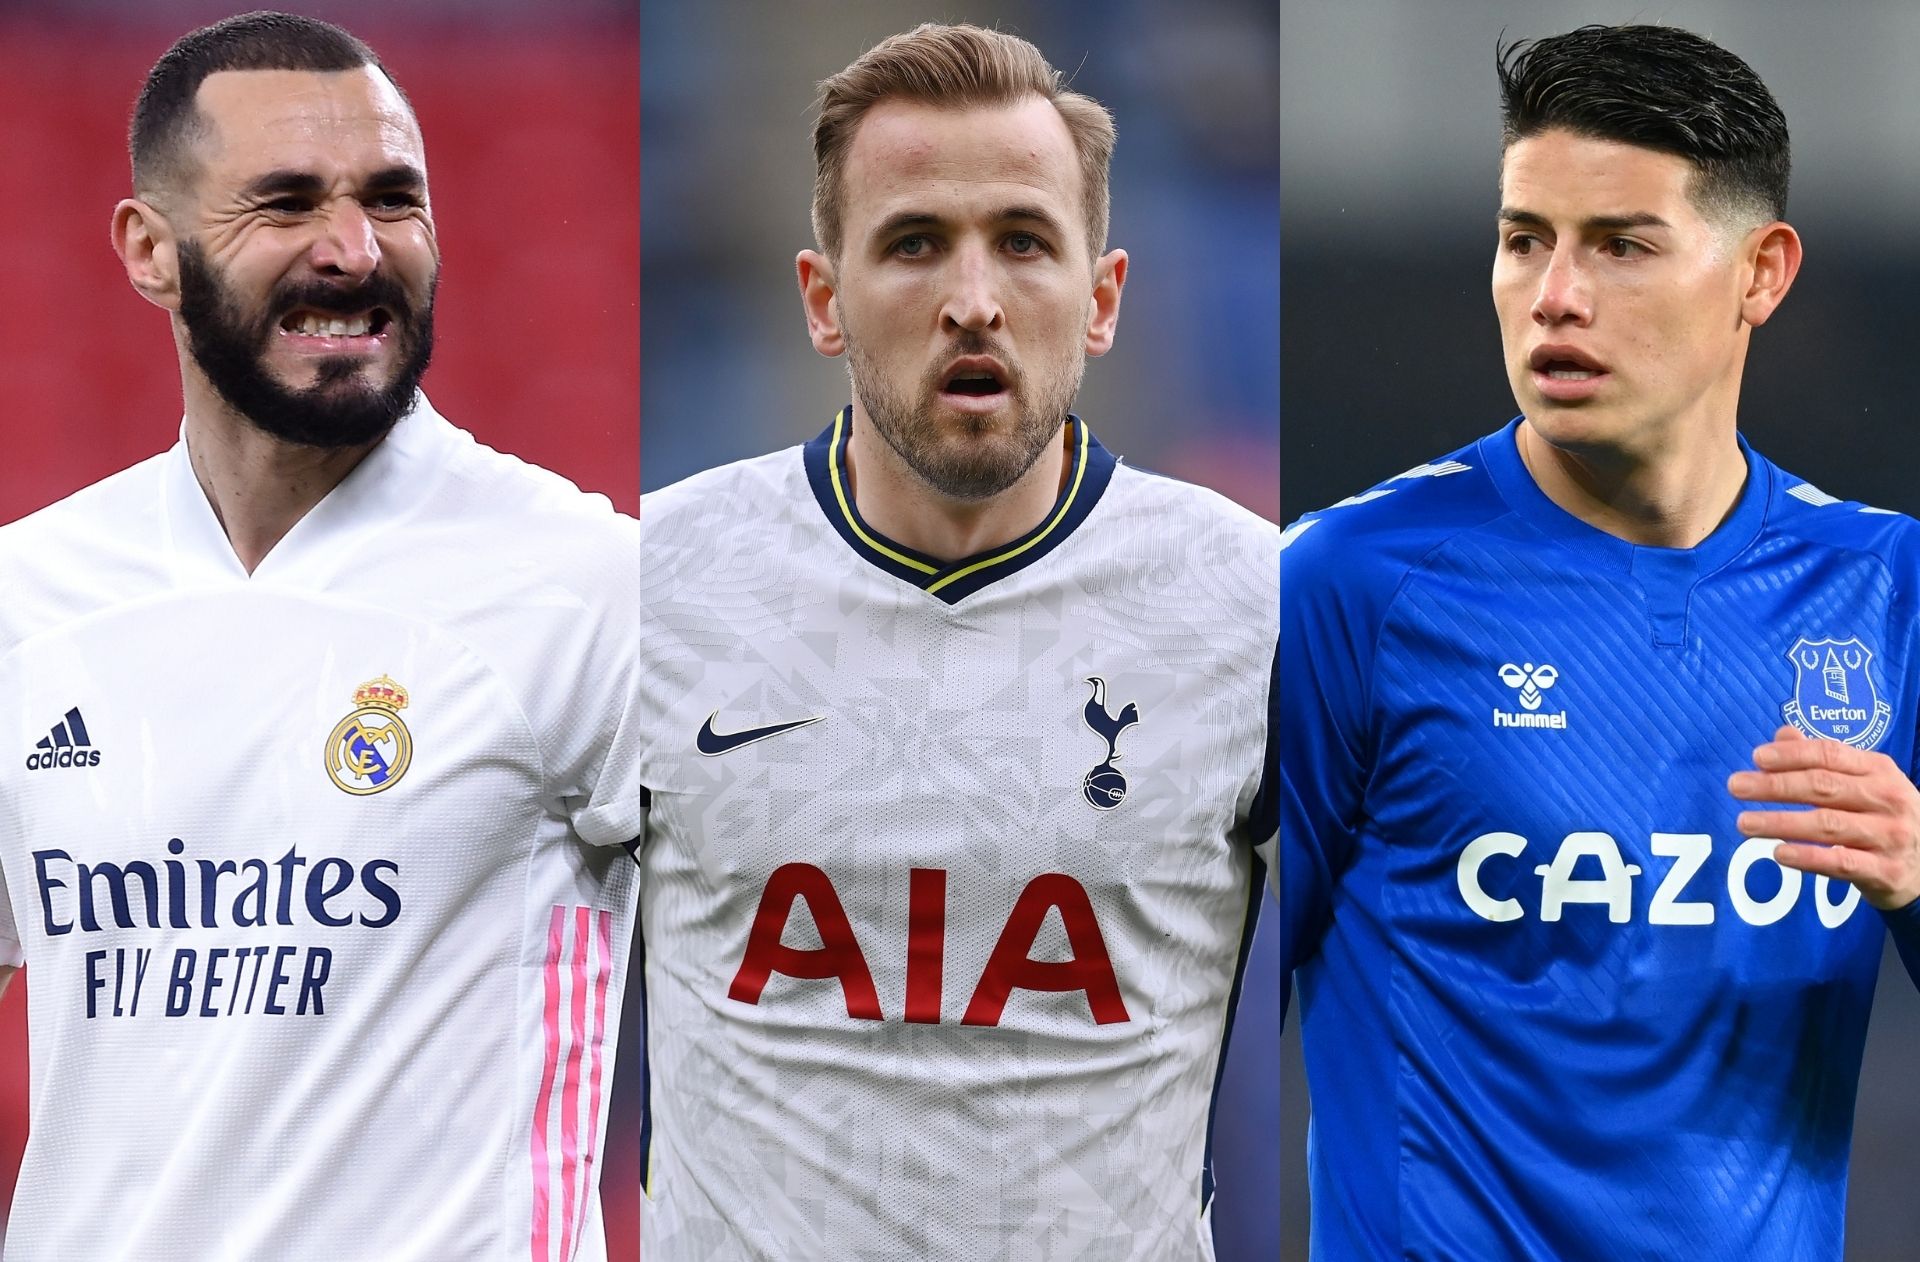 Monday's transfer rumors - Man City to call off Kane move?